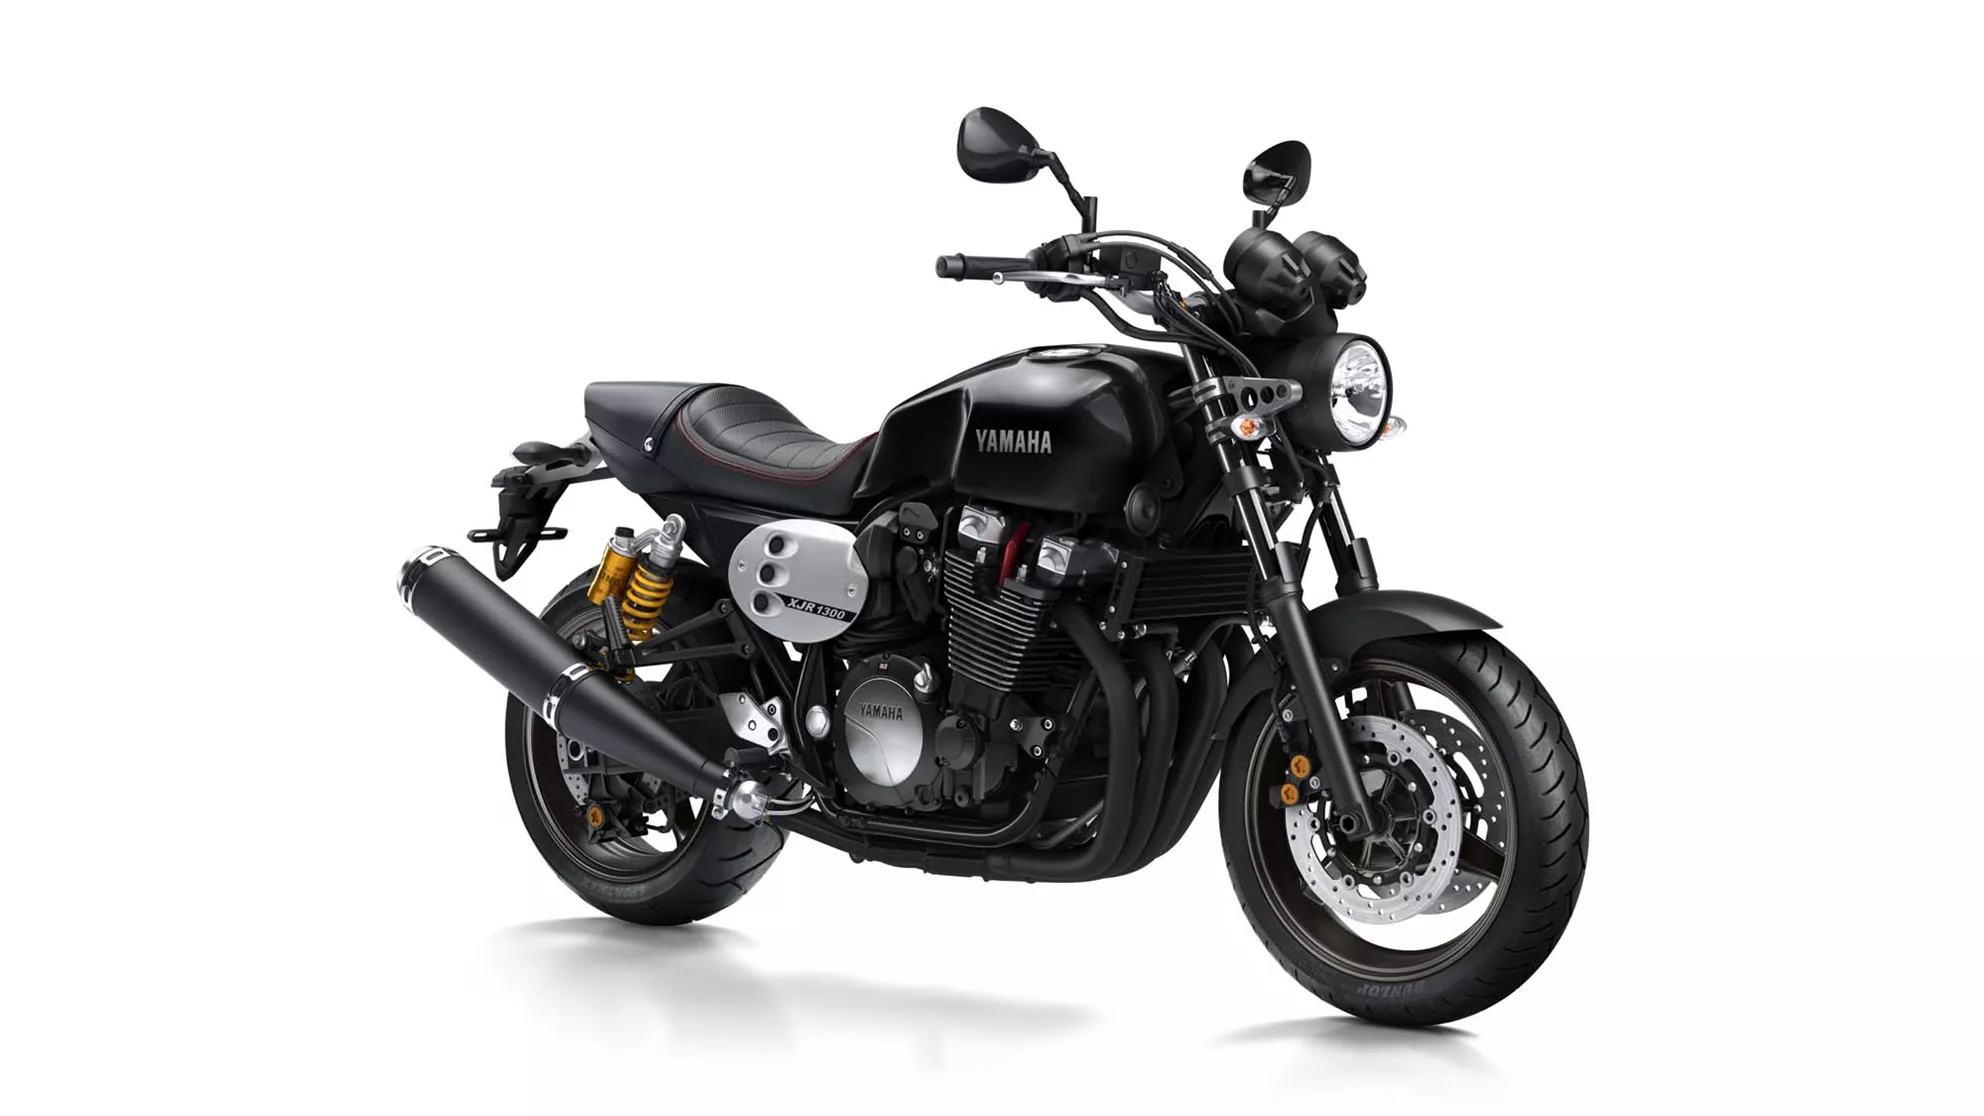 Picture Yamaha XJR 1300